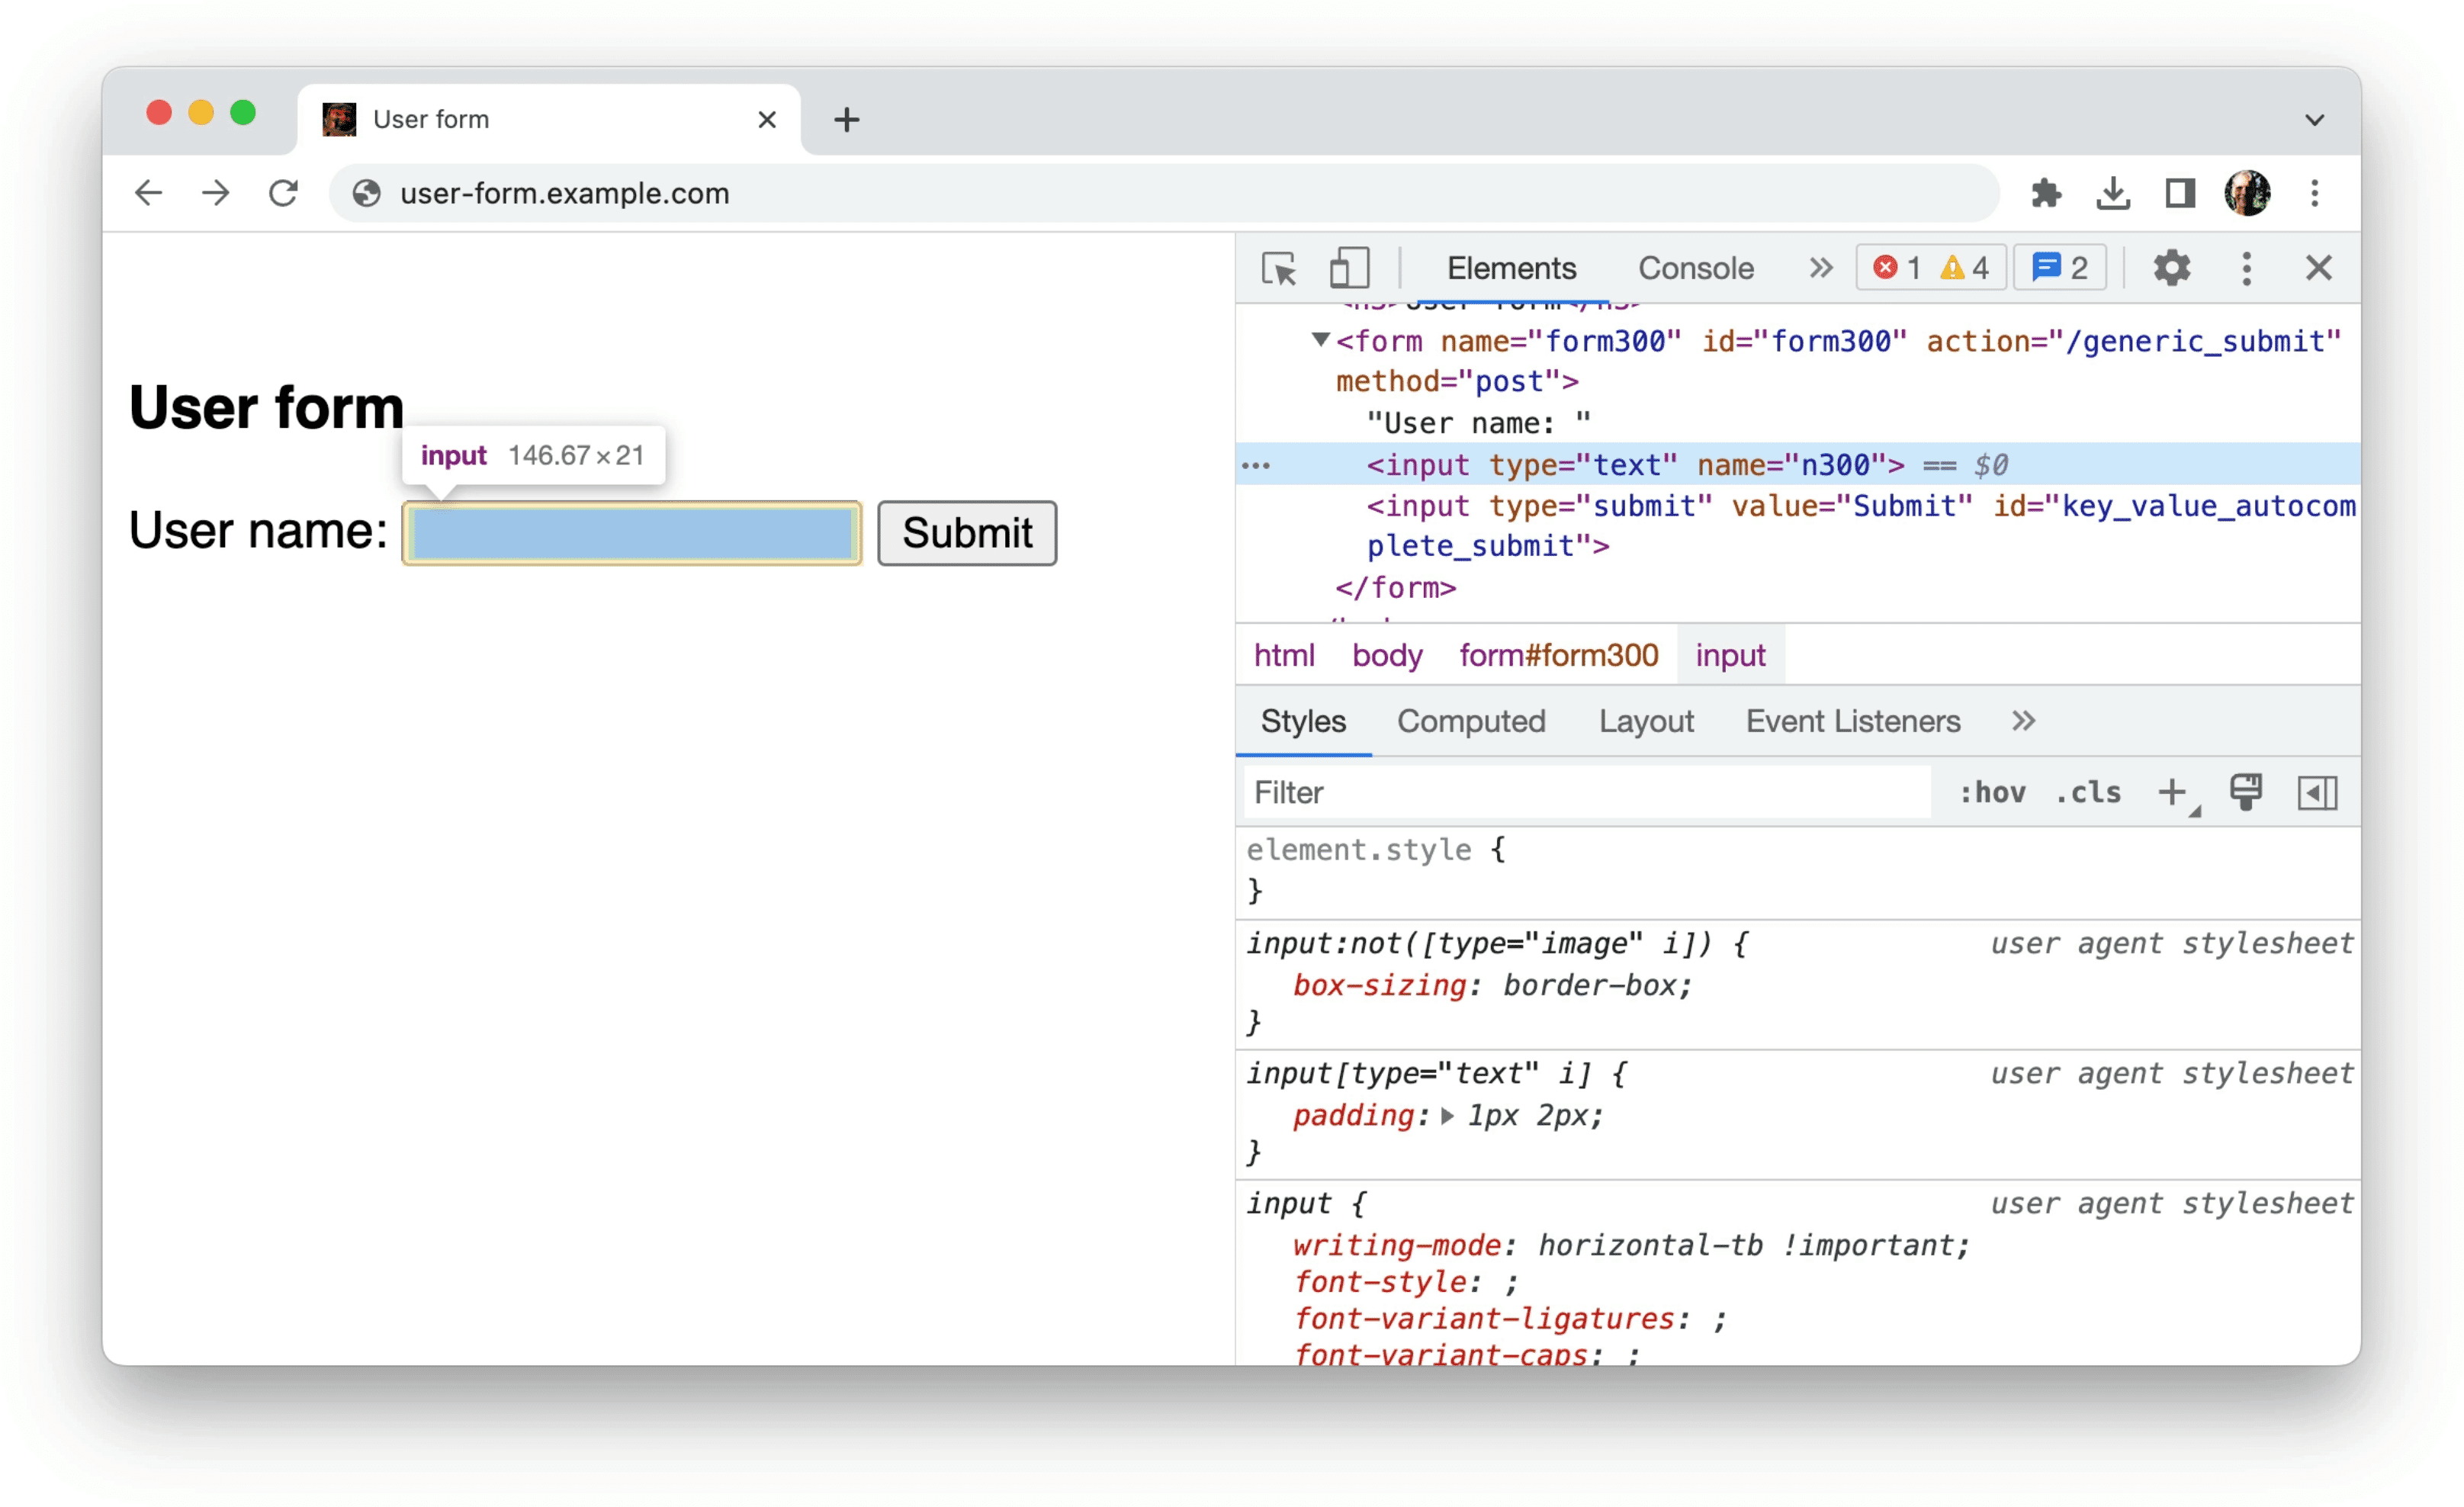 Chrome DevTools
showing information about the unstructured data in a form, as shown in the previous example: a
single input that only has the attributes type=text and name=n300.